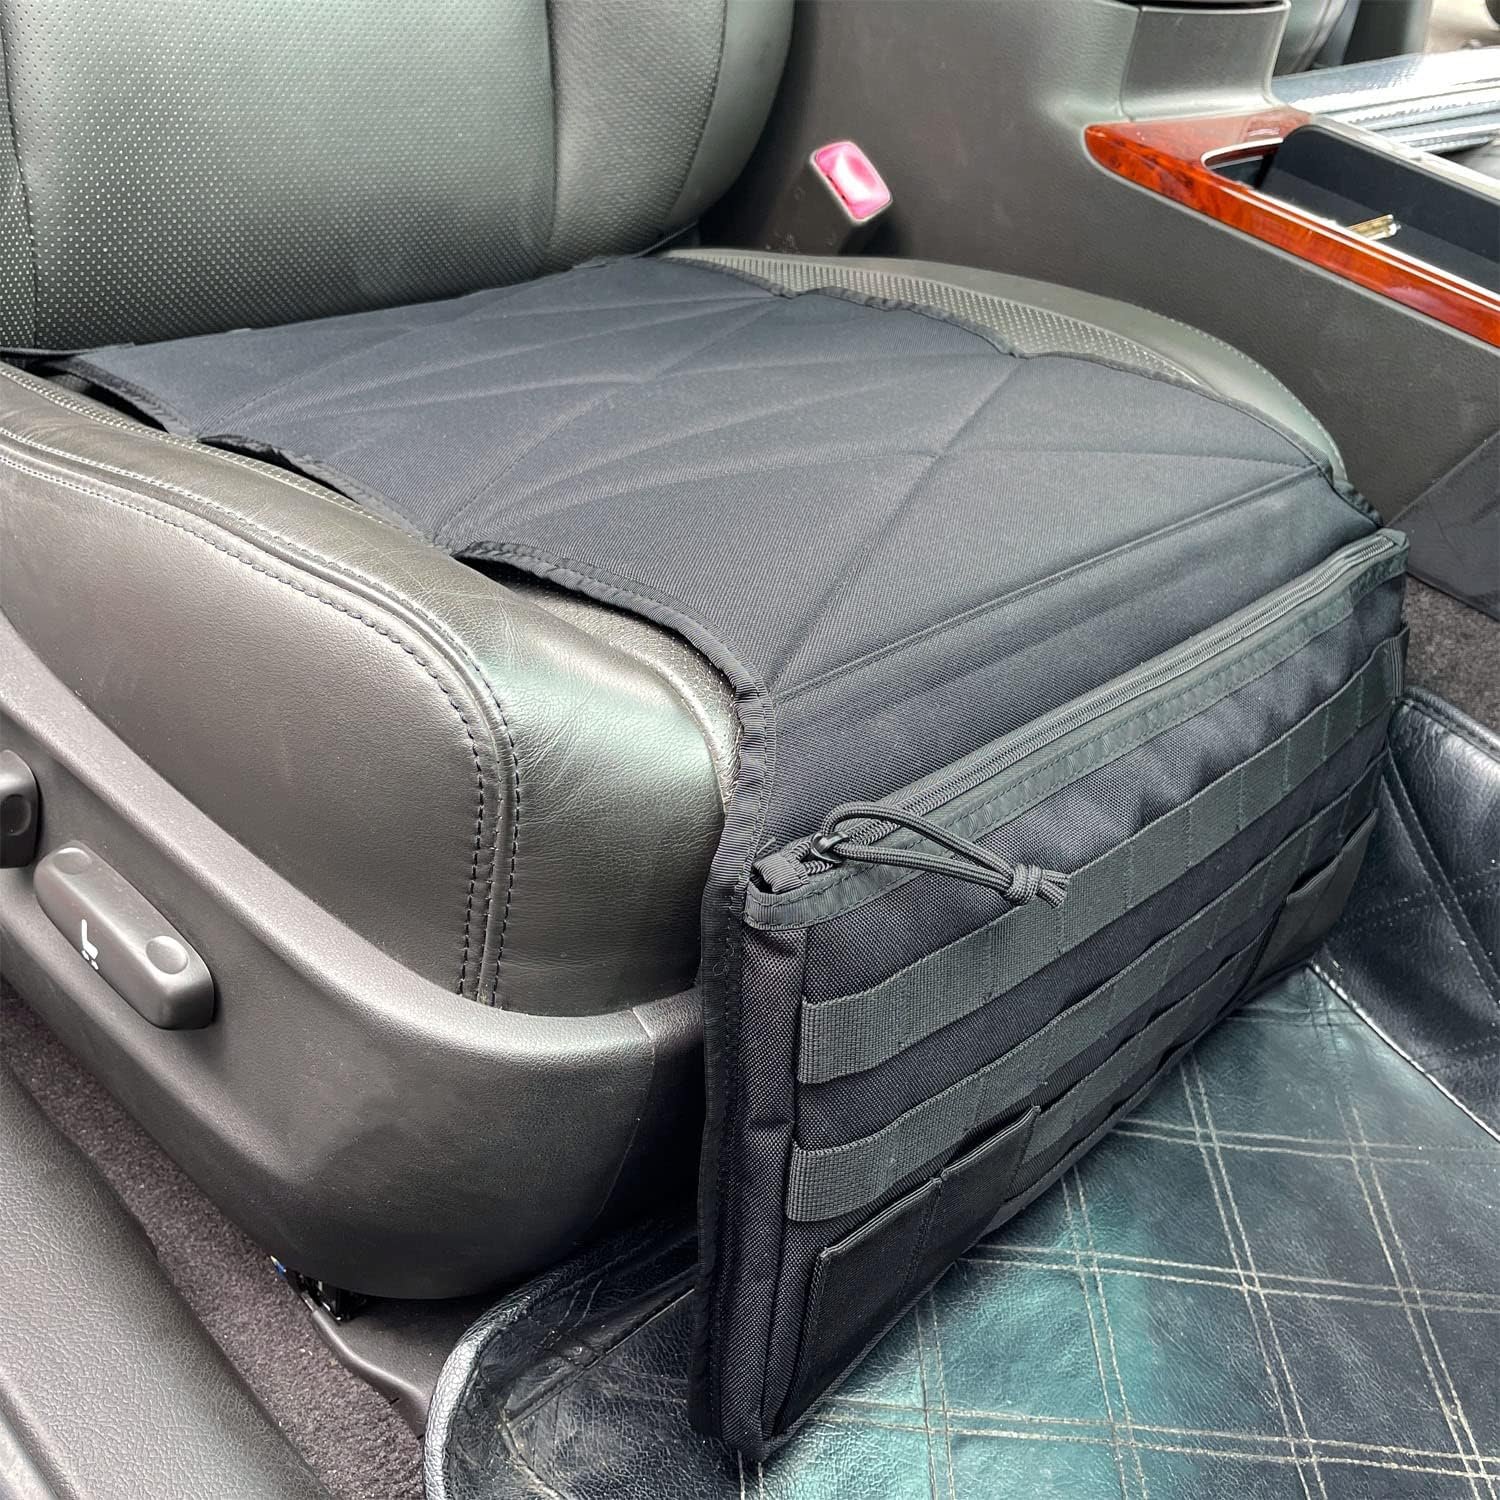 Concealed Car Seat Carry Holster Review